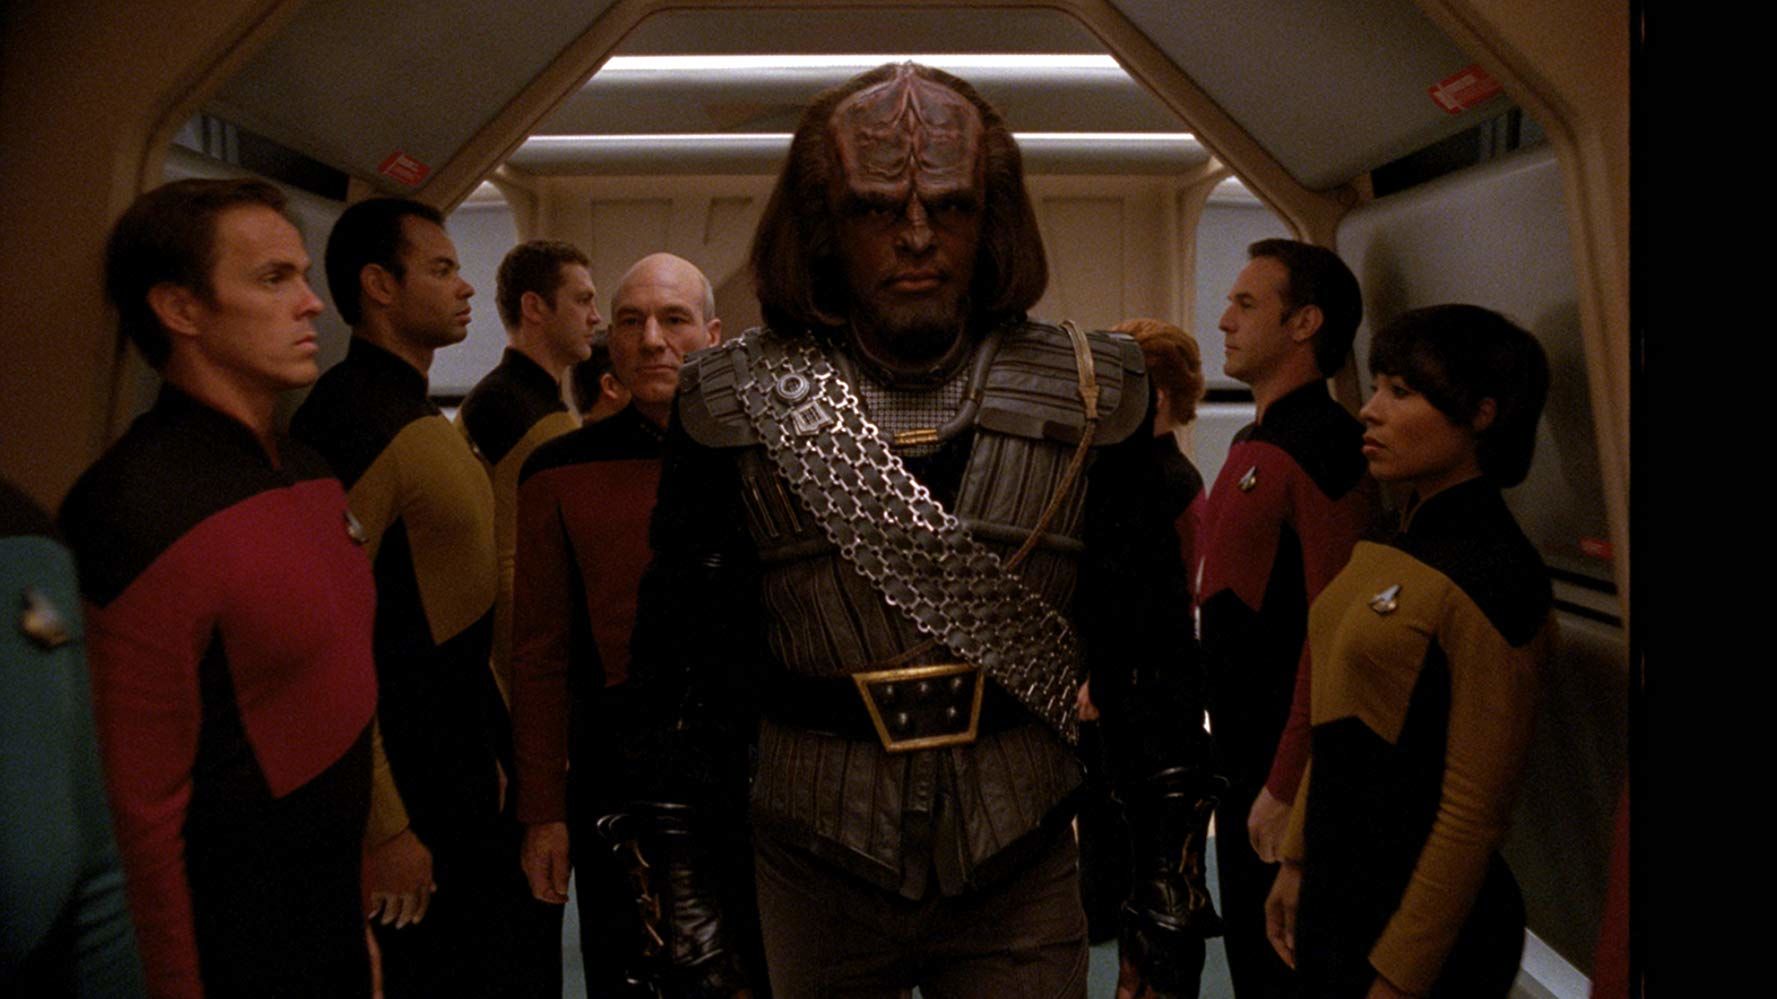 Who Played Worf In Star Trek